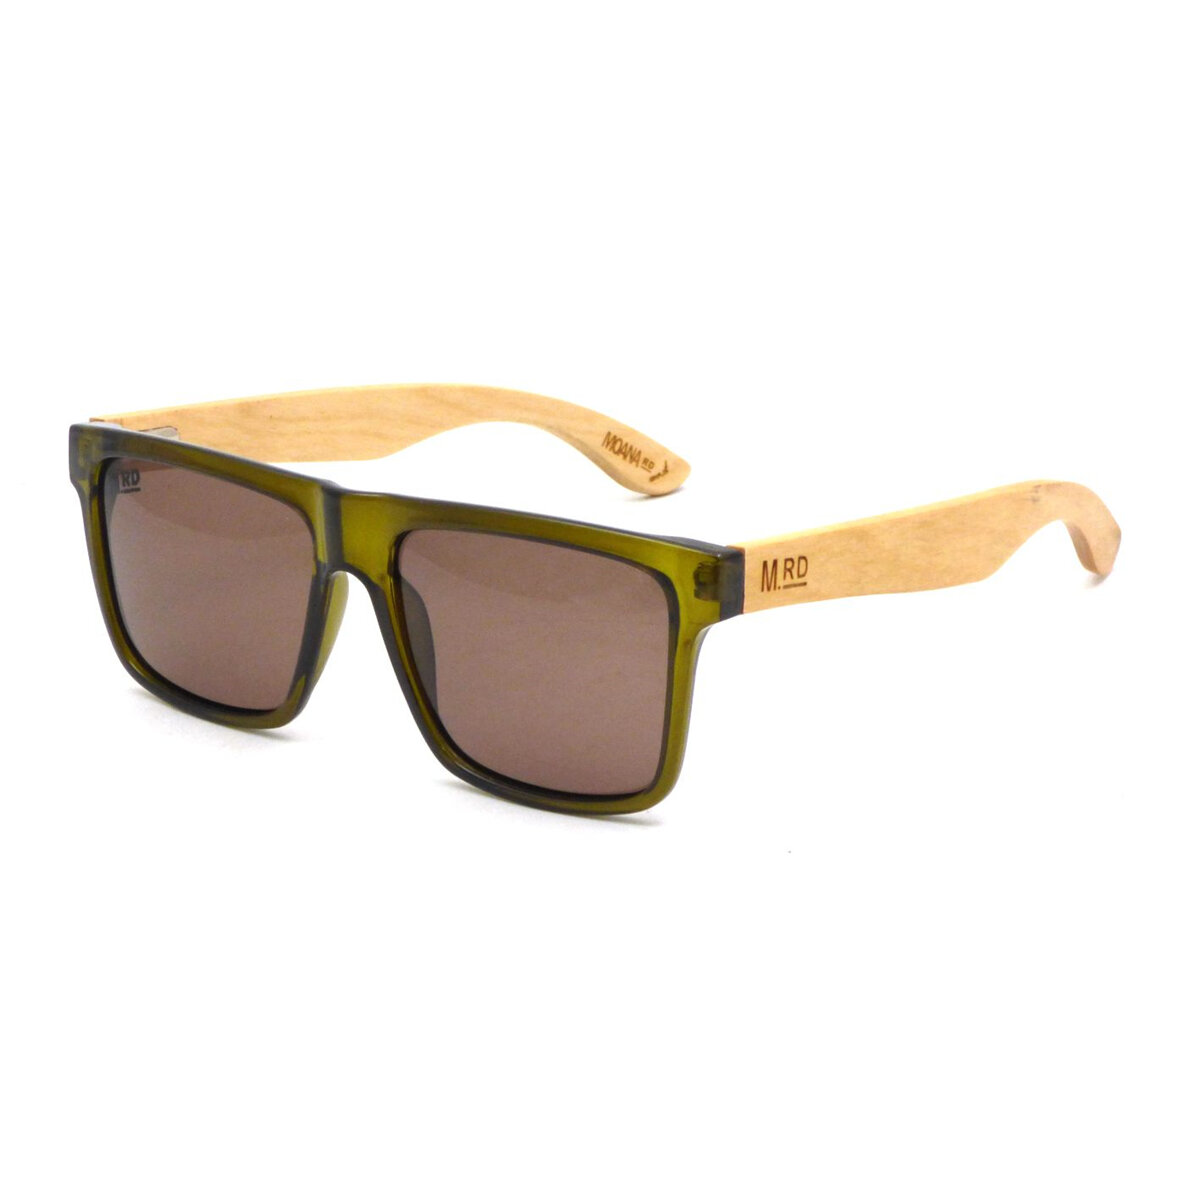 Moana Road Sunglasses + Free Case!, Bouncer Green with Wood Arms 3811